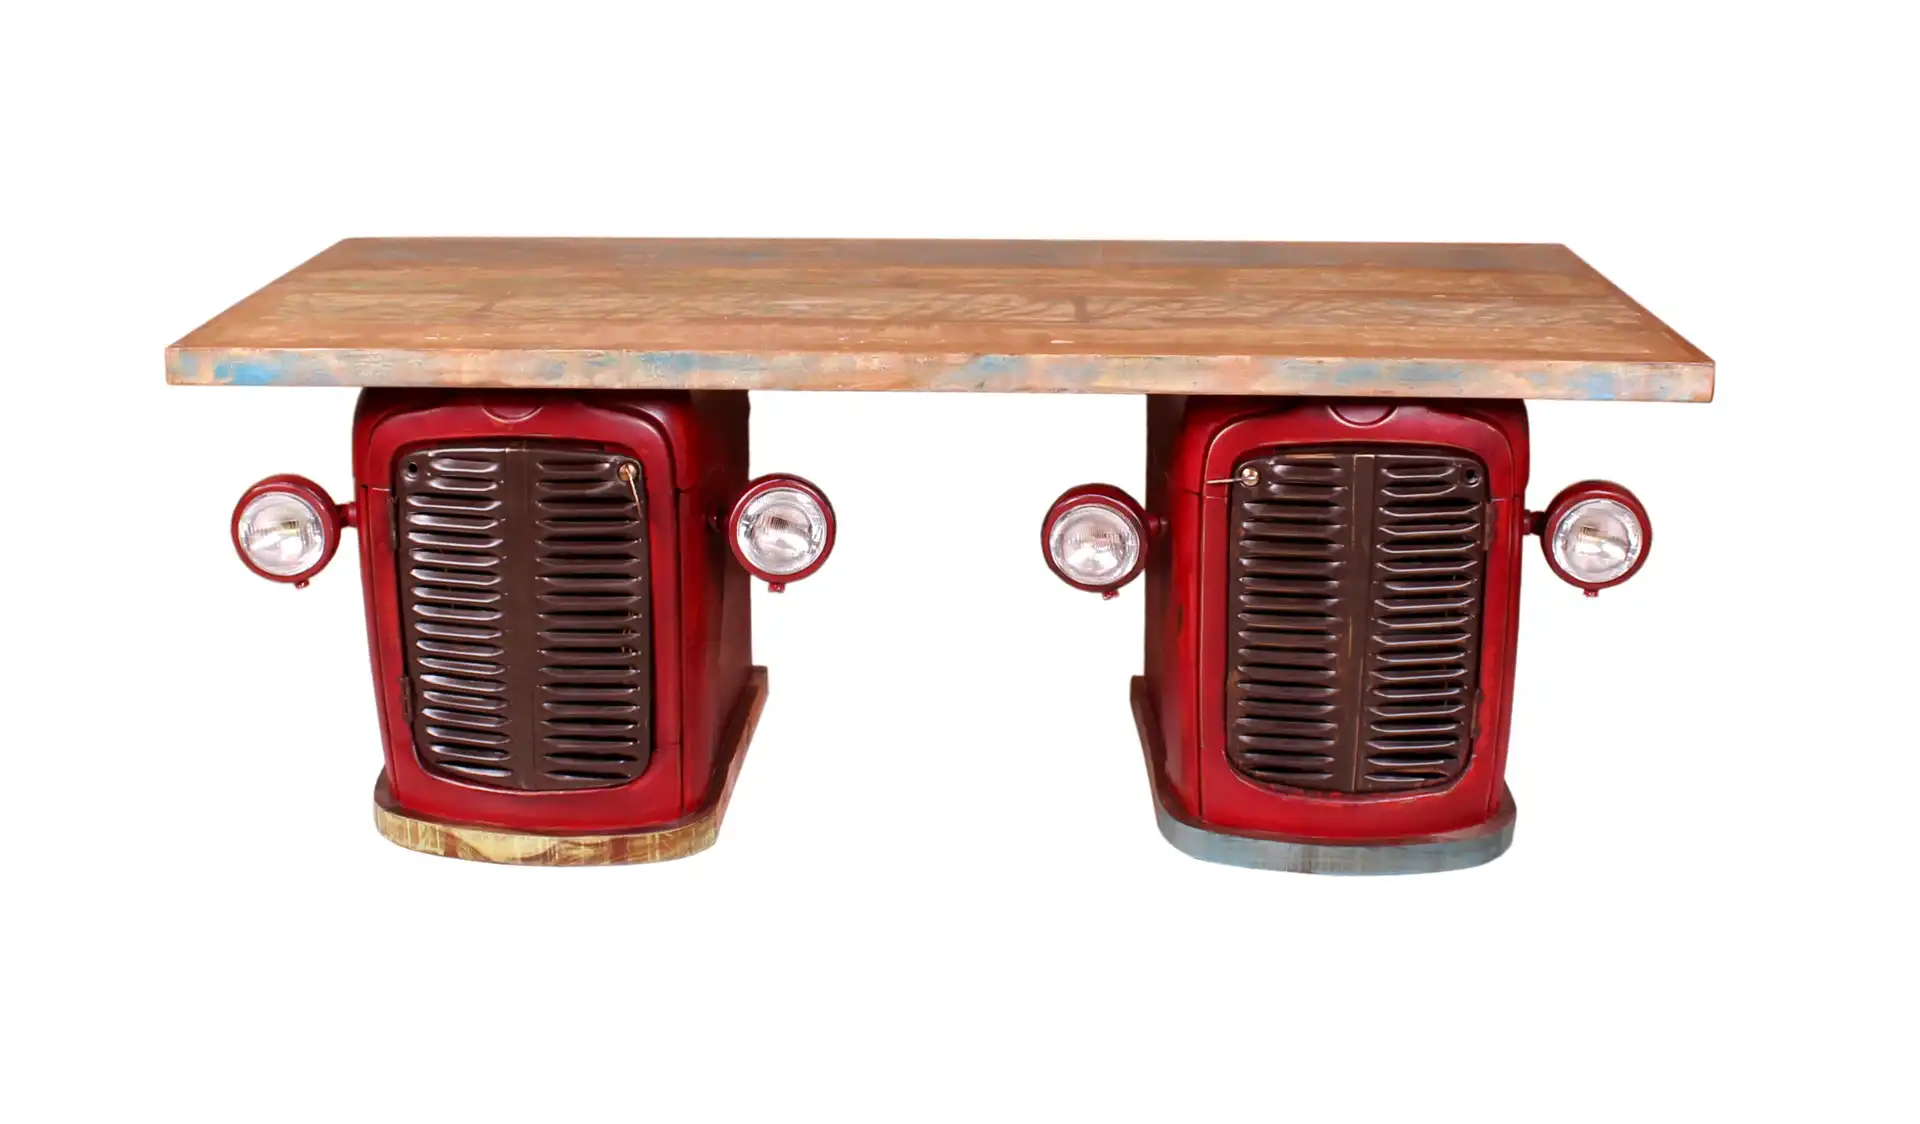 Tractor Office Table with Back Side 2 Drawers & 2 Doors
(KD) - popular handicrafts